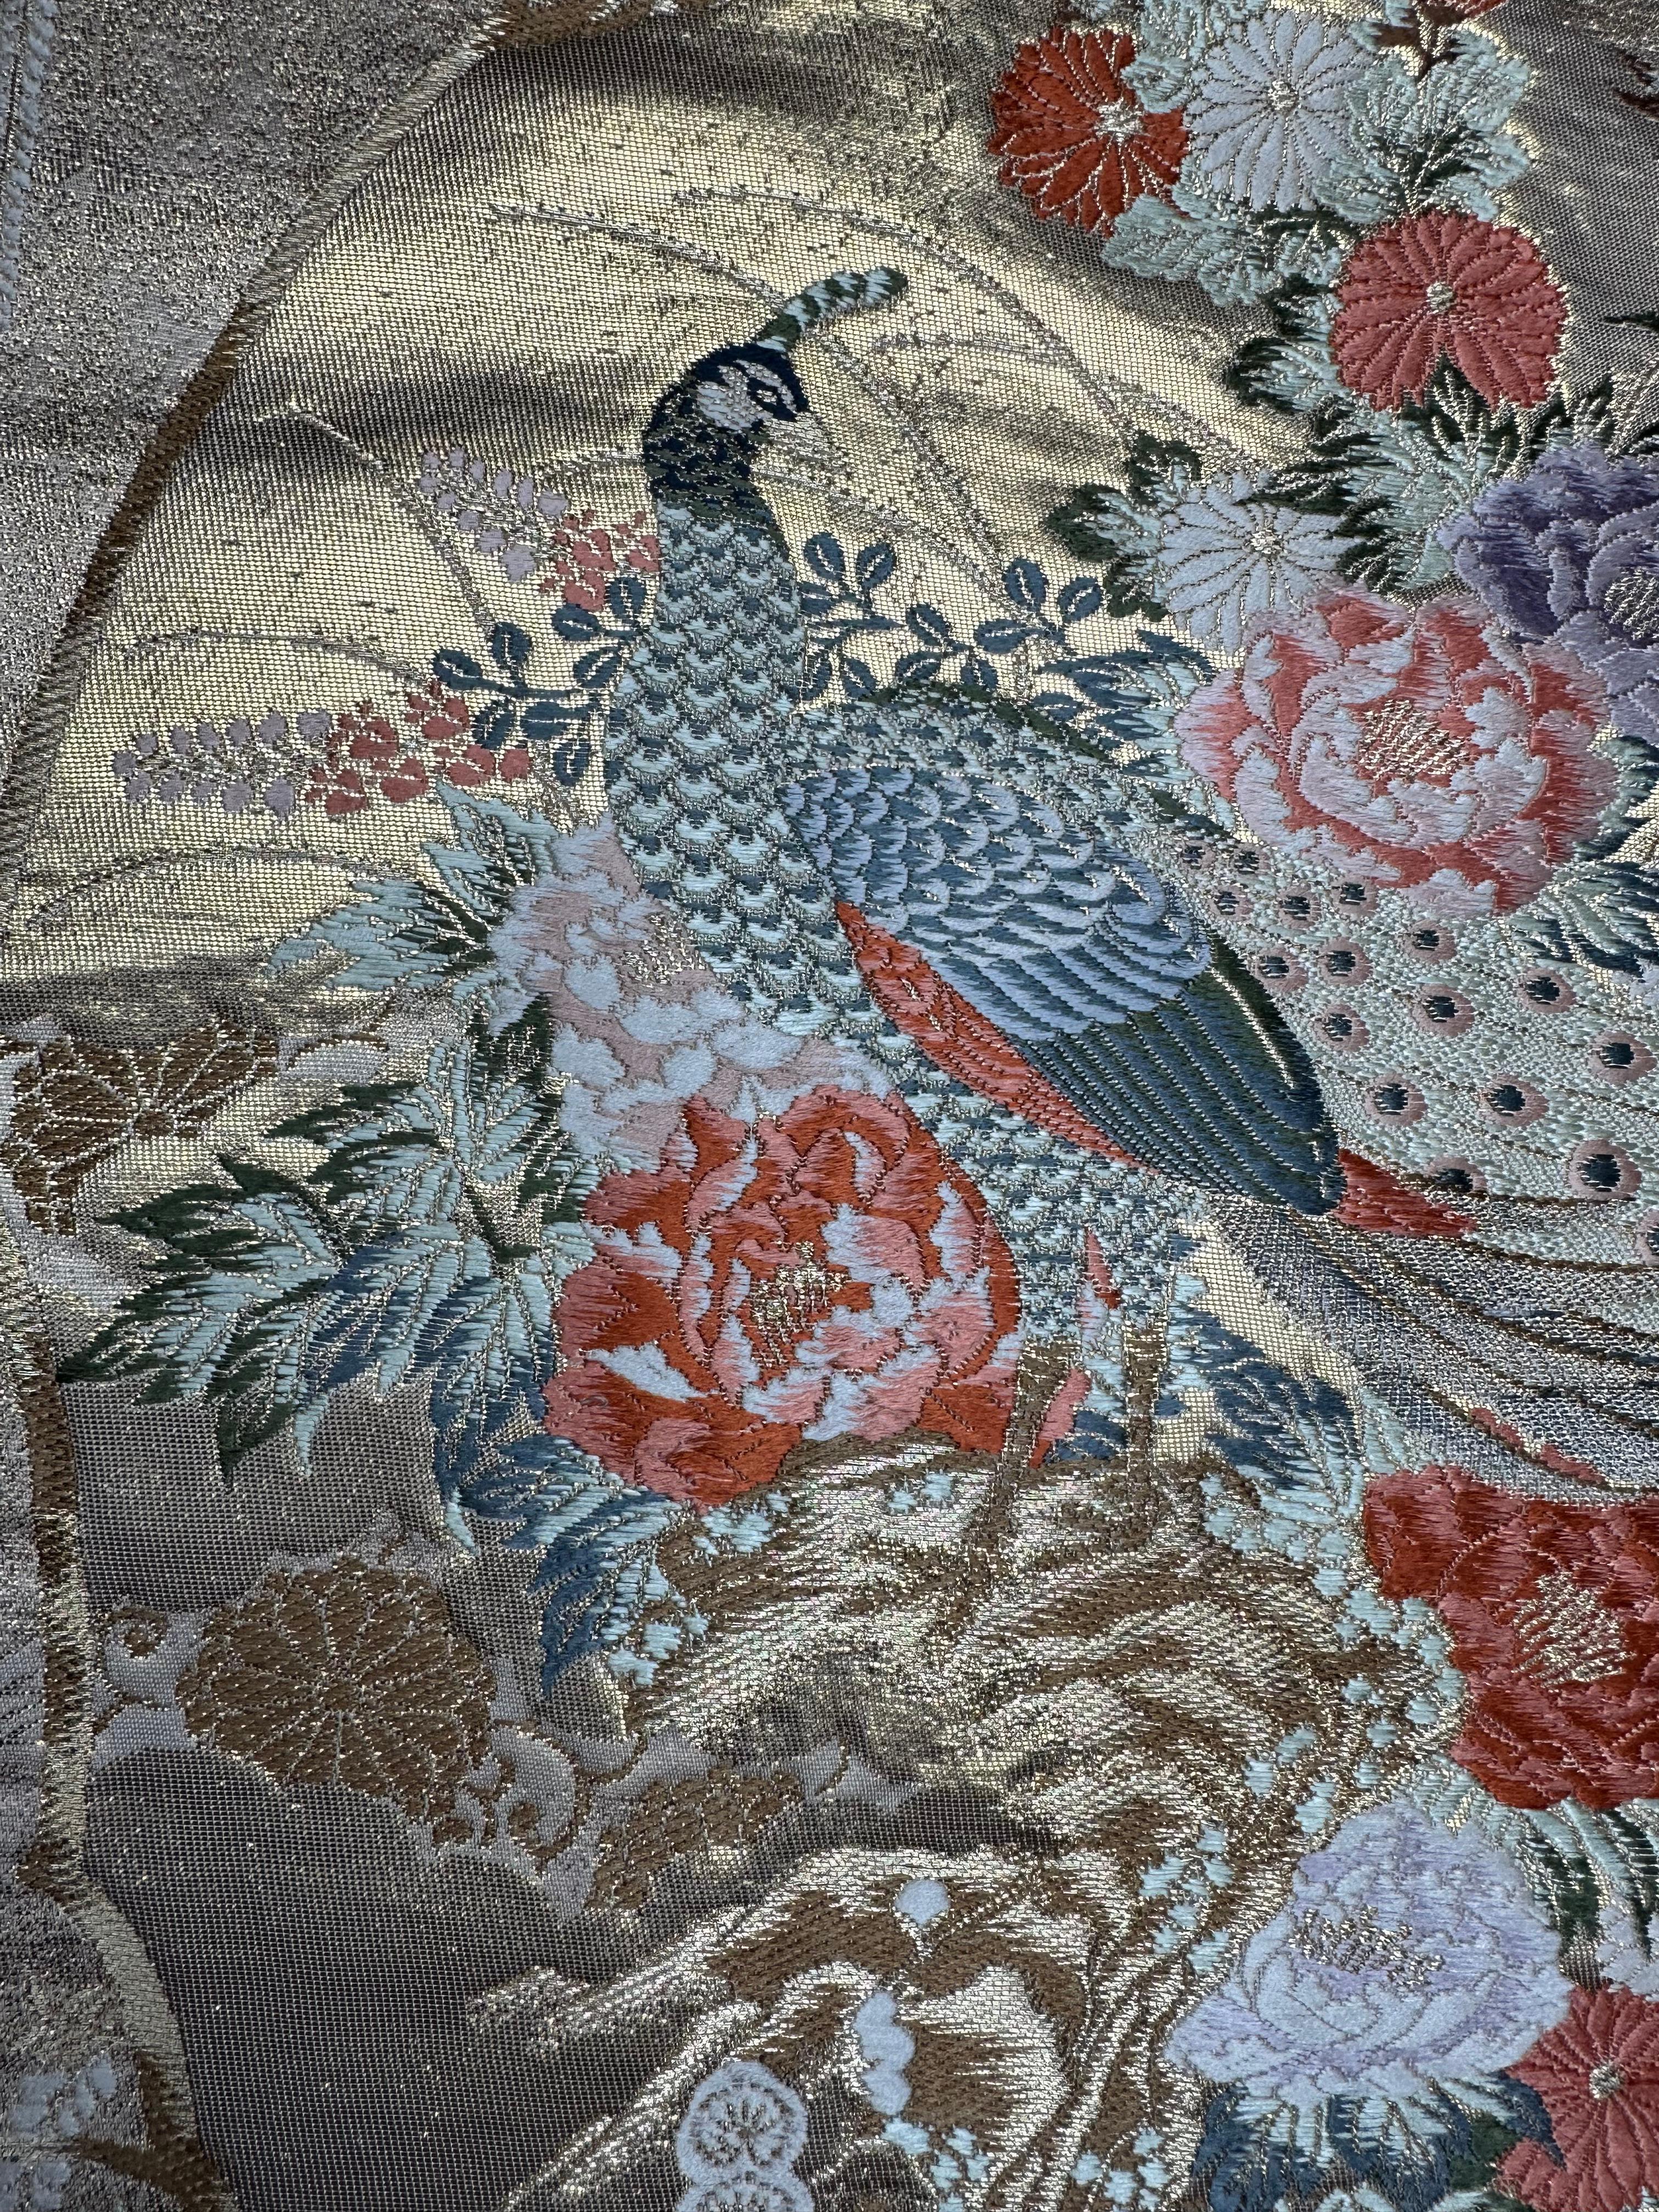 Contemporary Kimono Tapestry “The Queen of Peacocks” , Japanese Art, Japanese Hanging Scroll For Sale